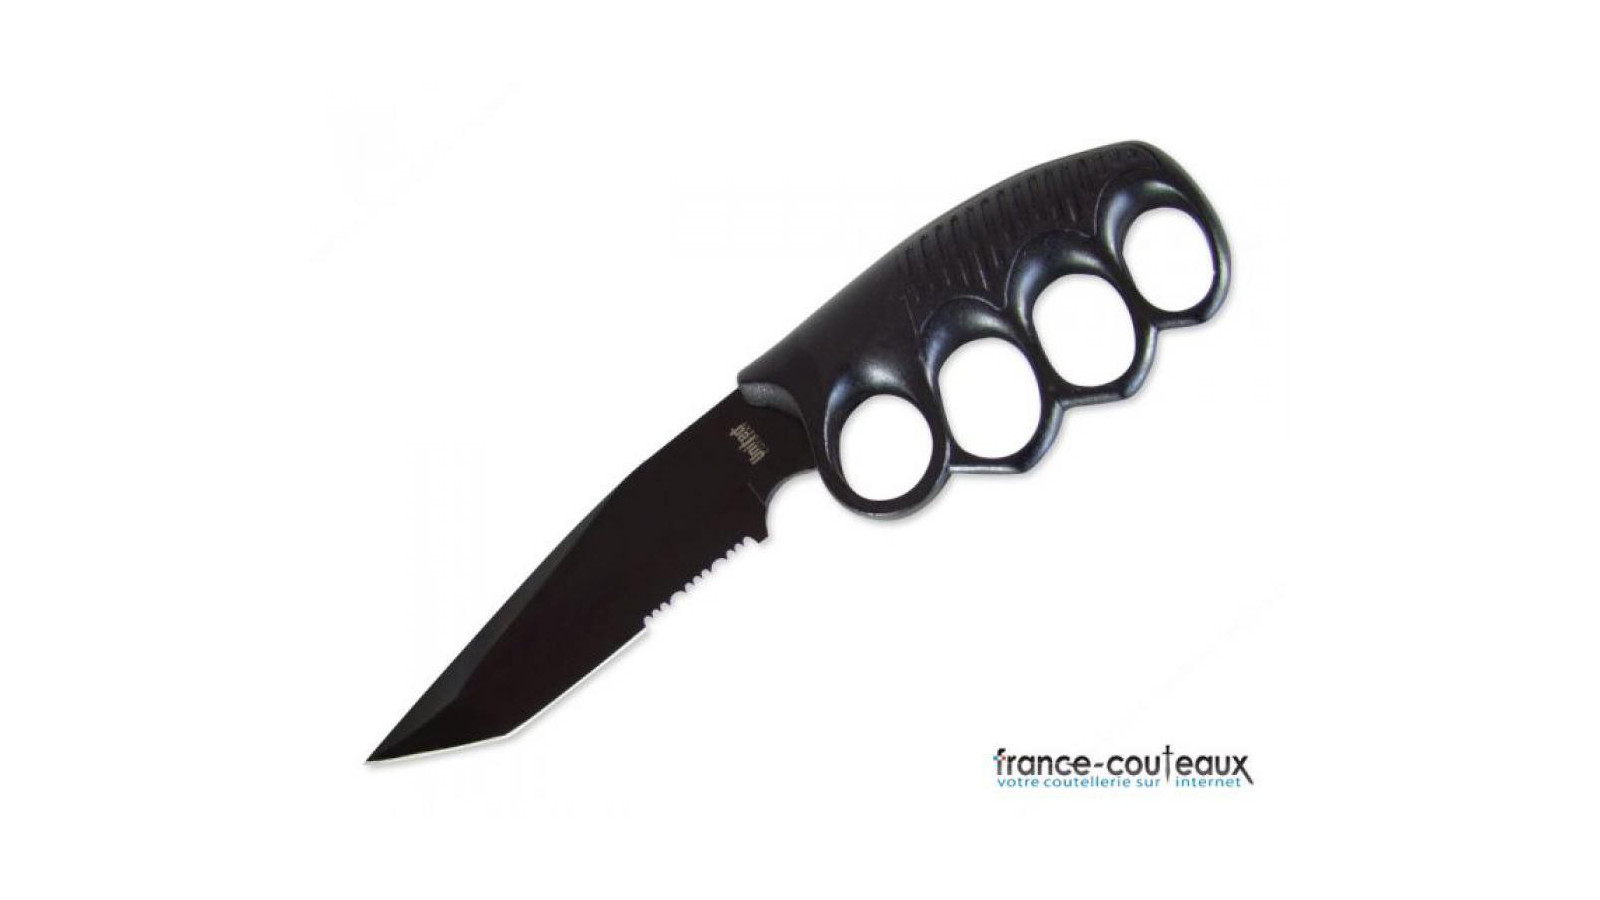 Couteau Sentry lame tanto